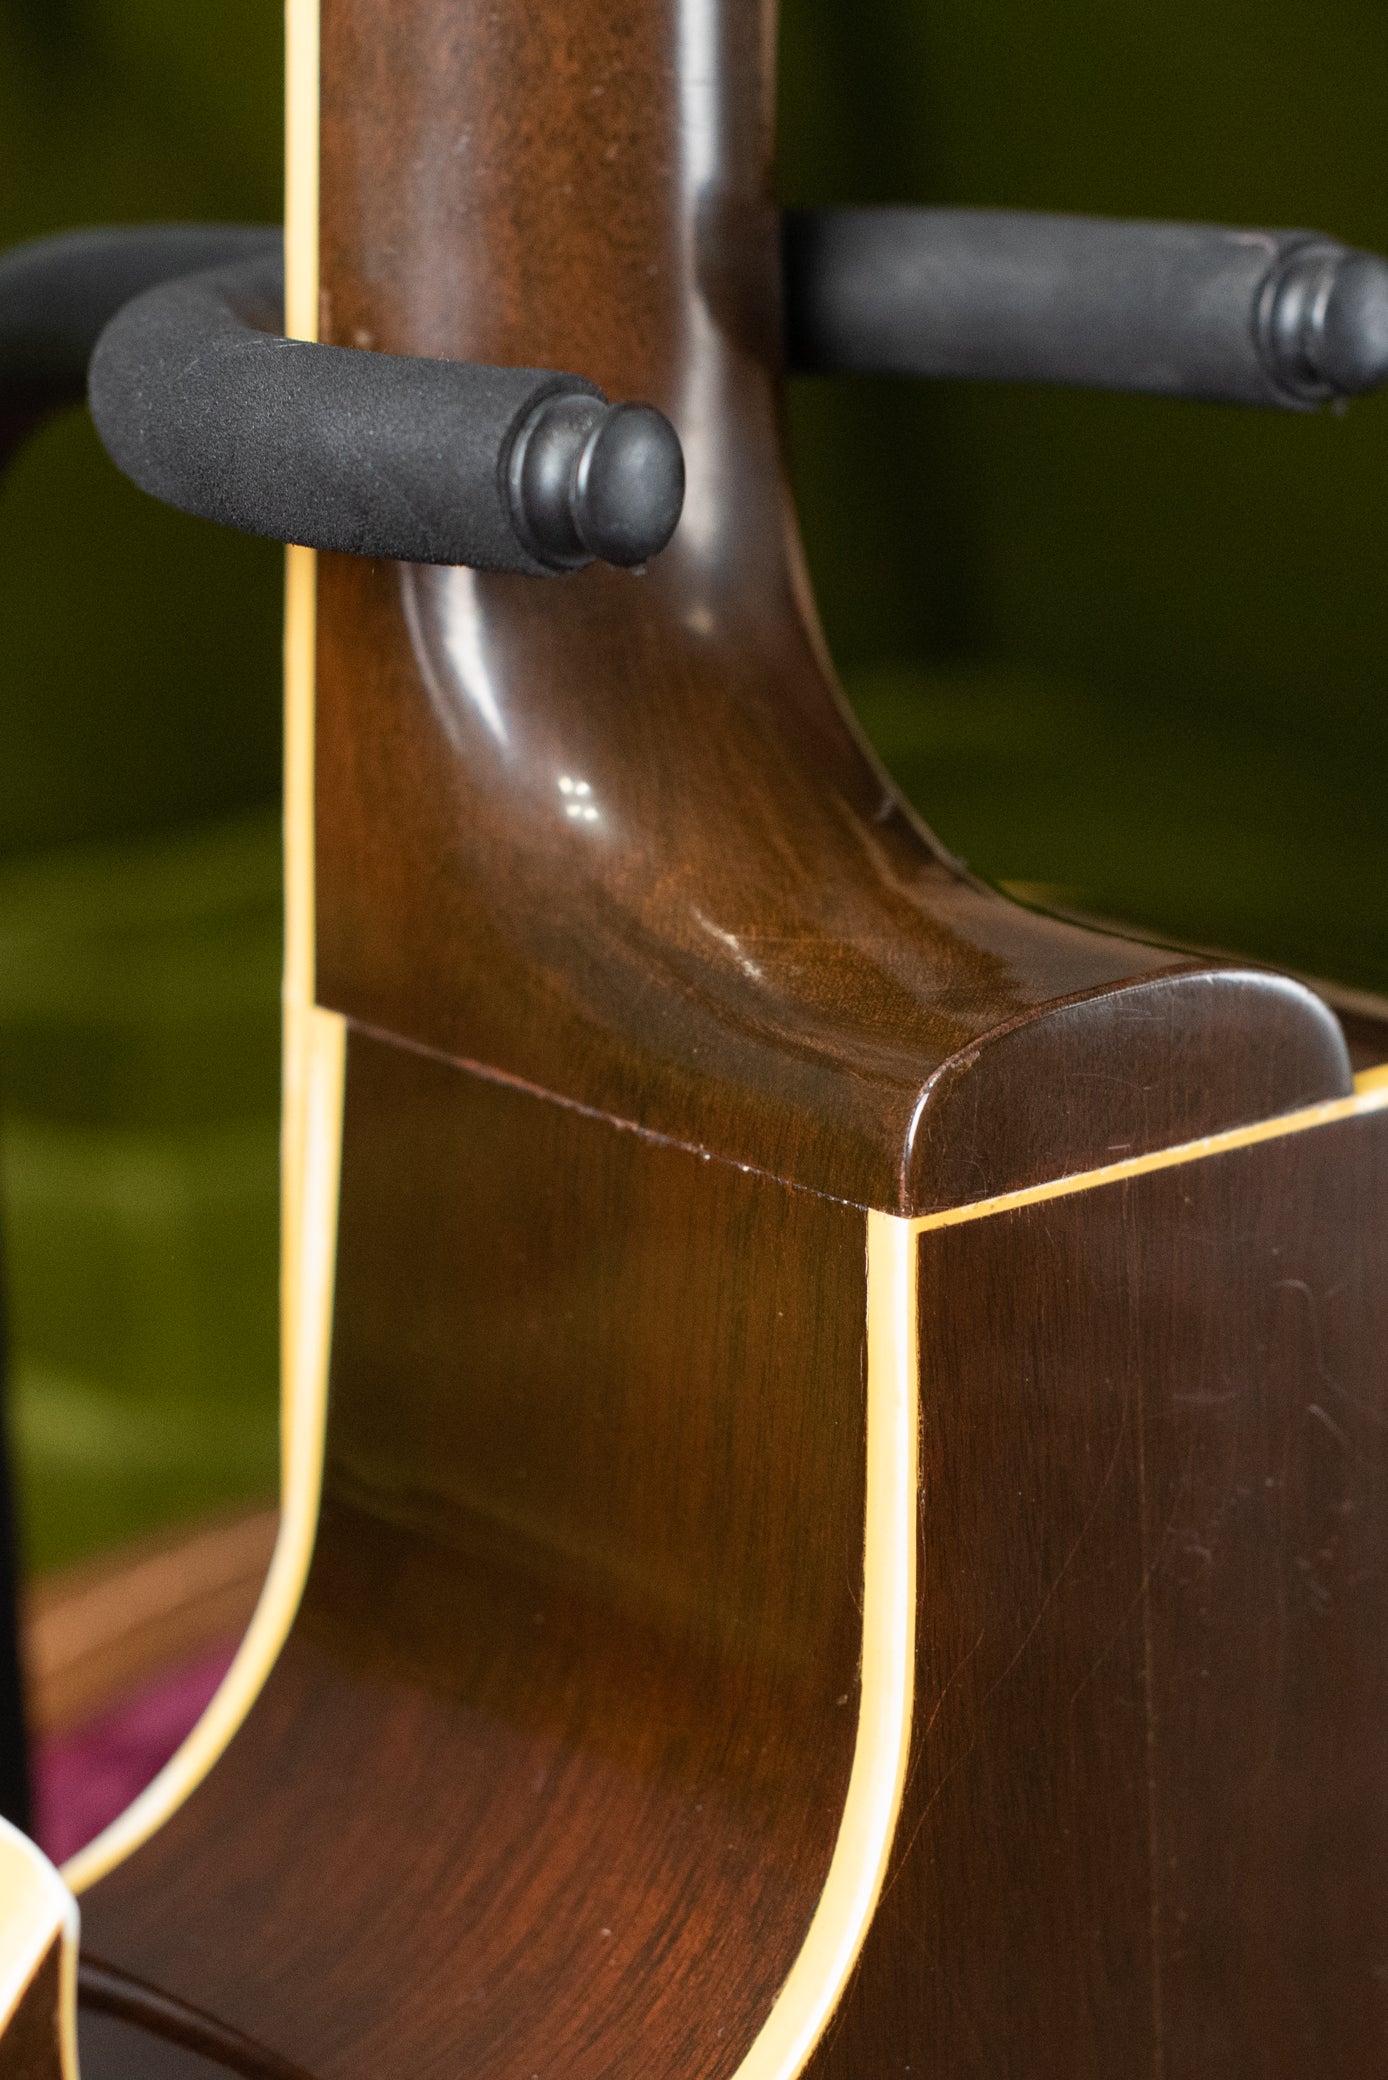 Gibson CF-100 neck joint